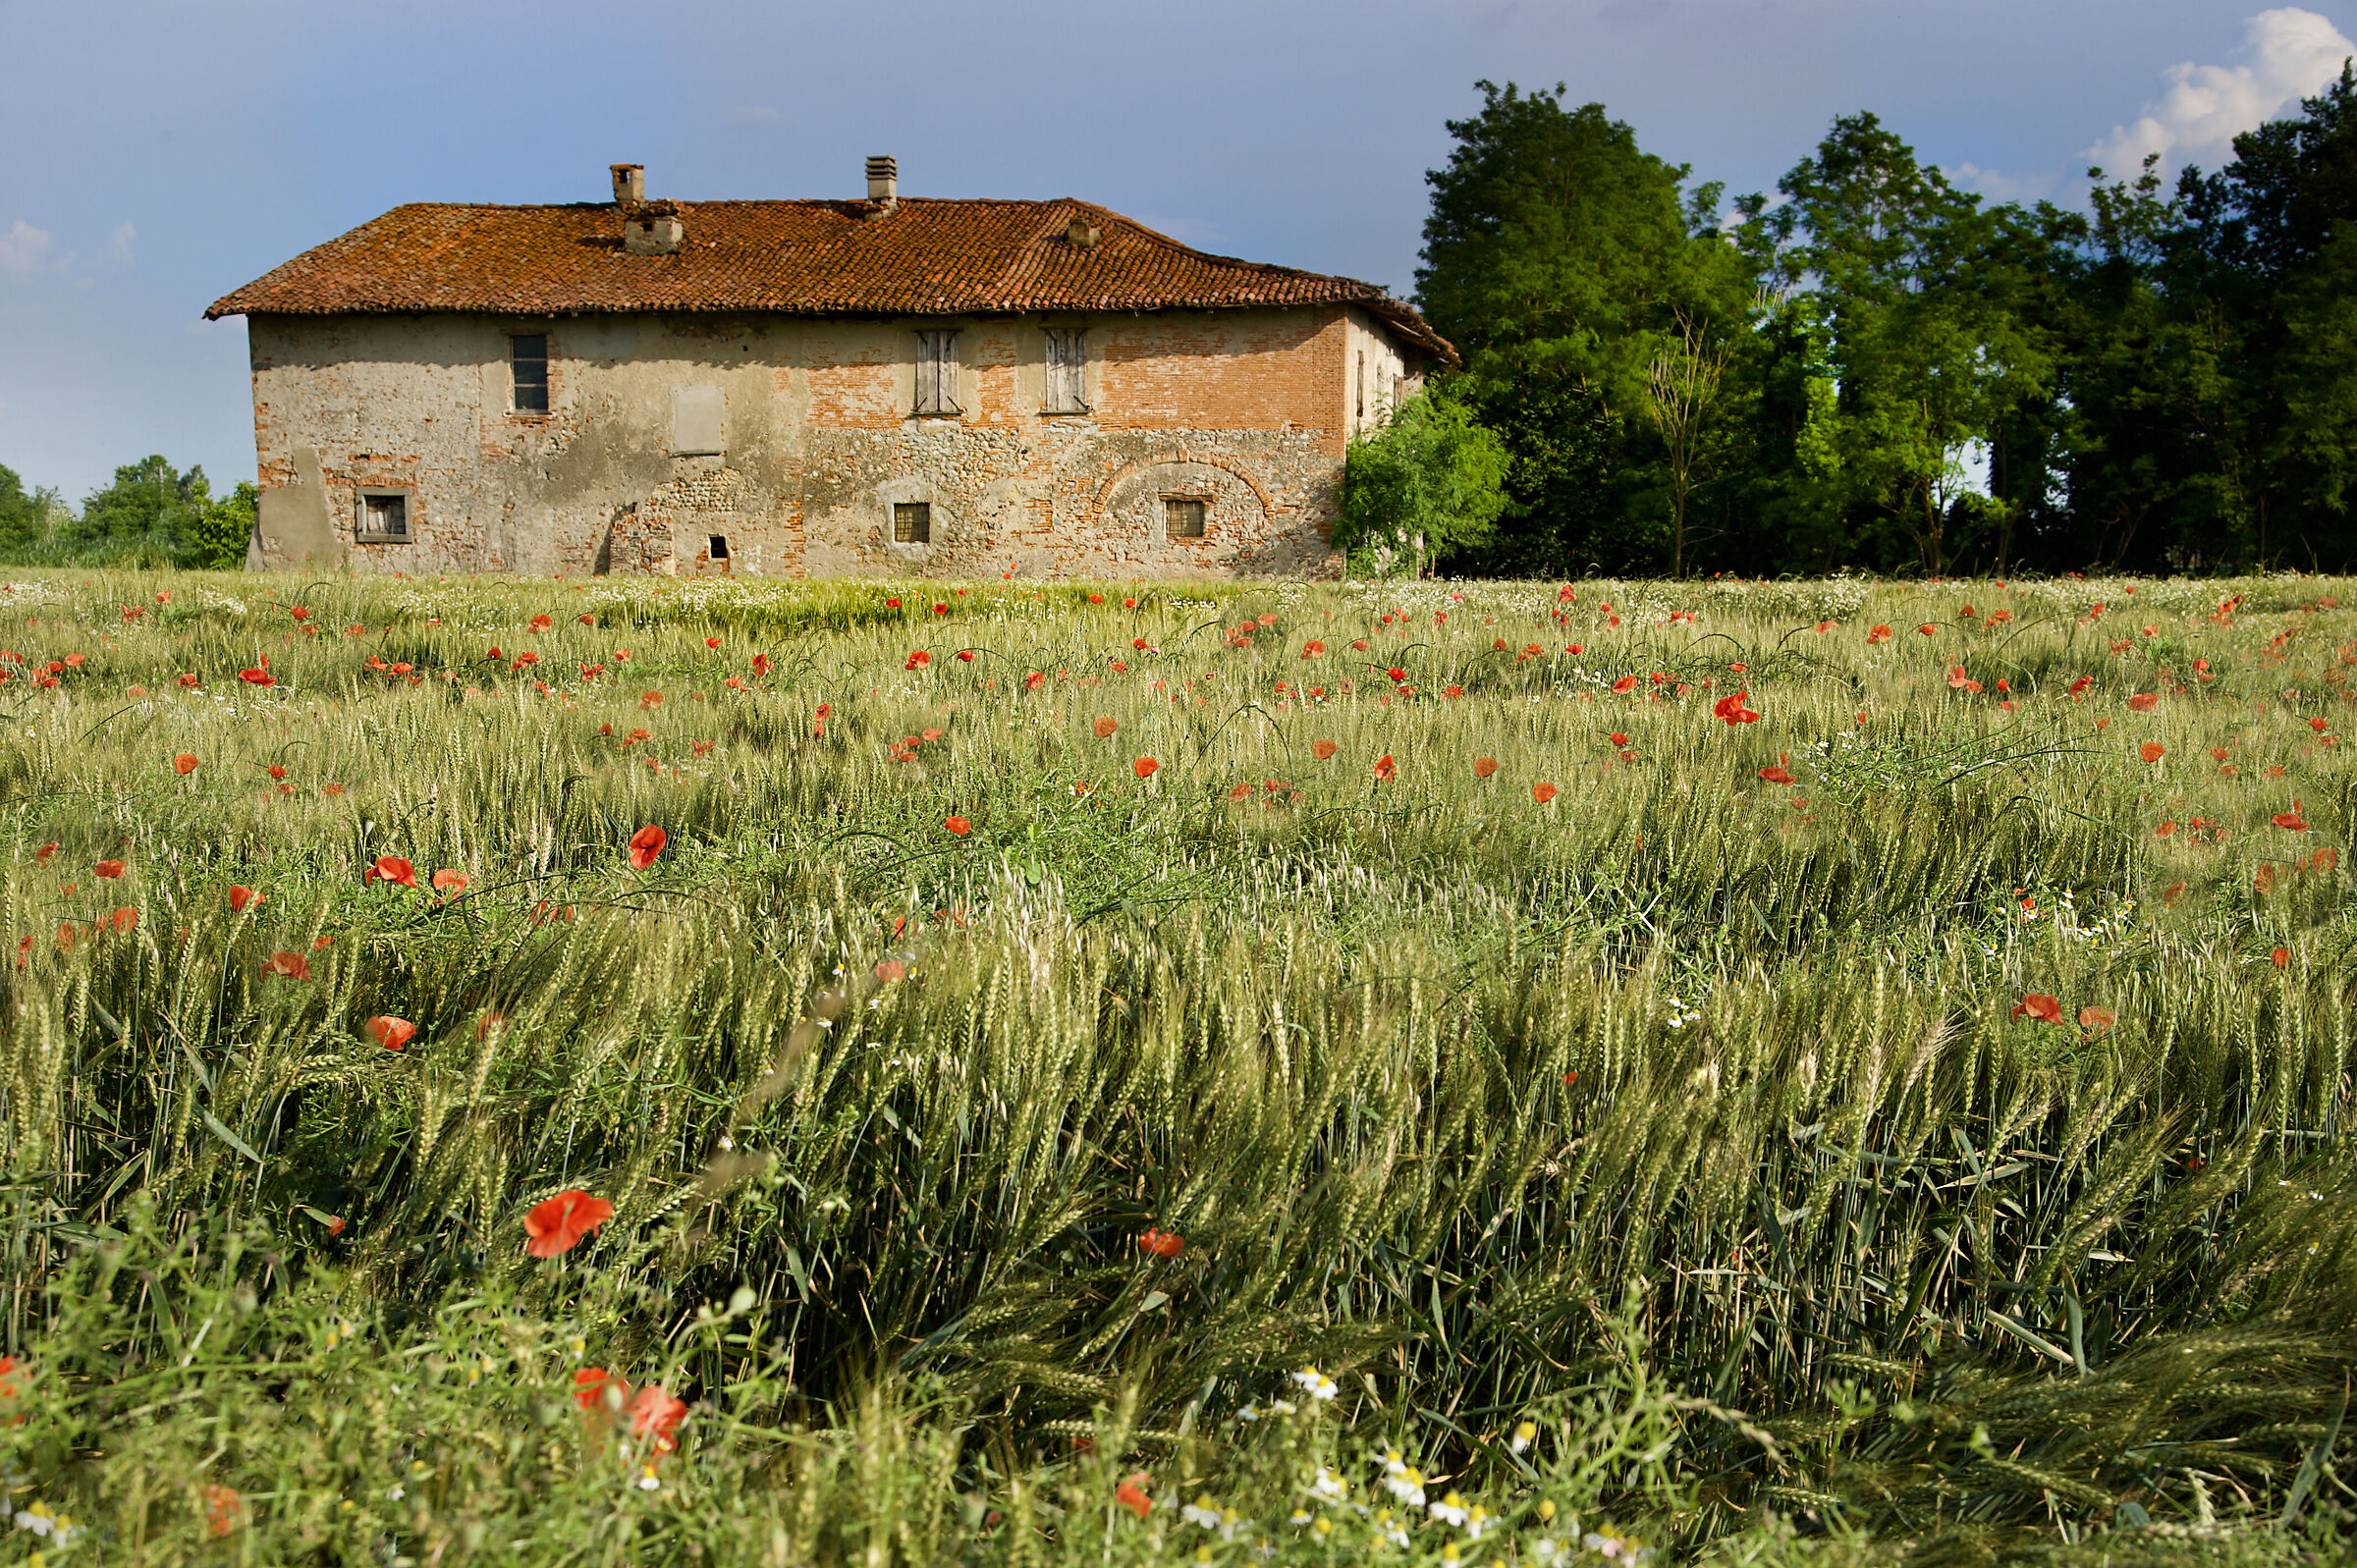 Farmhouse and poppies...